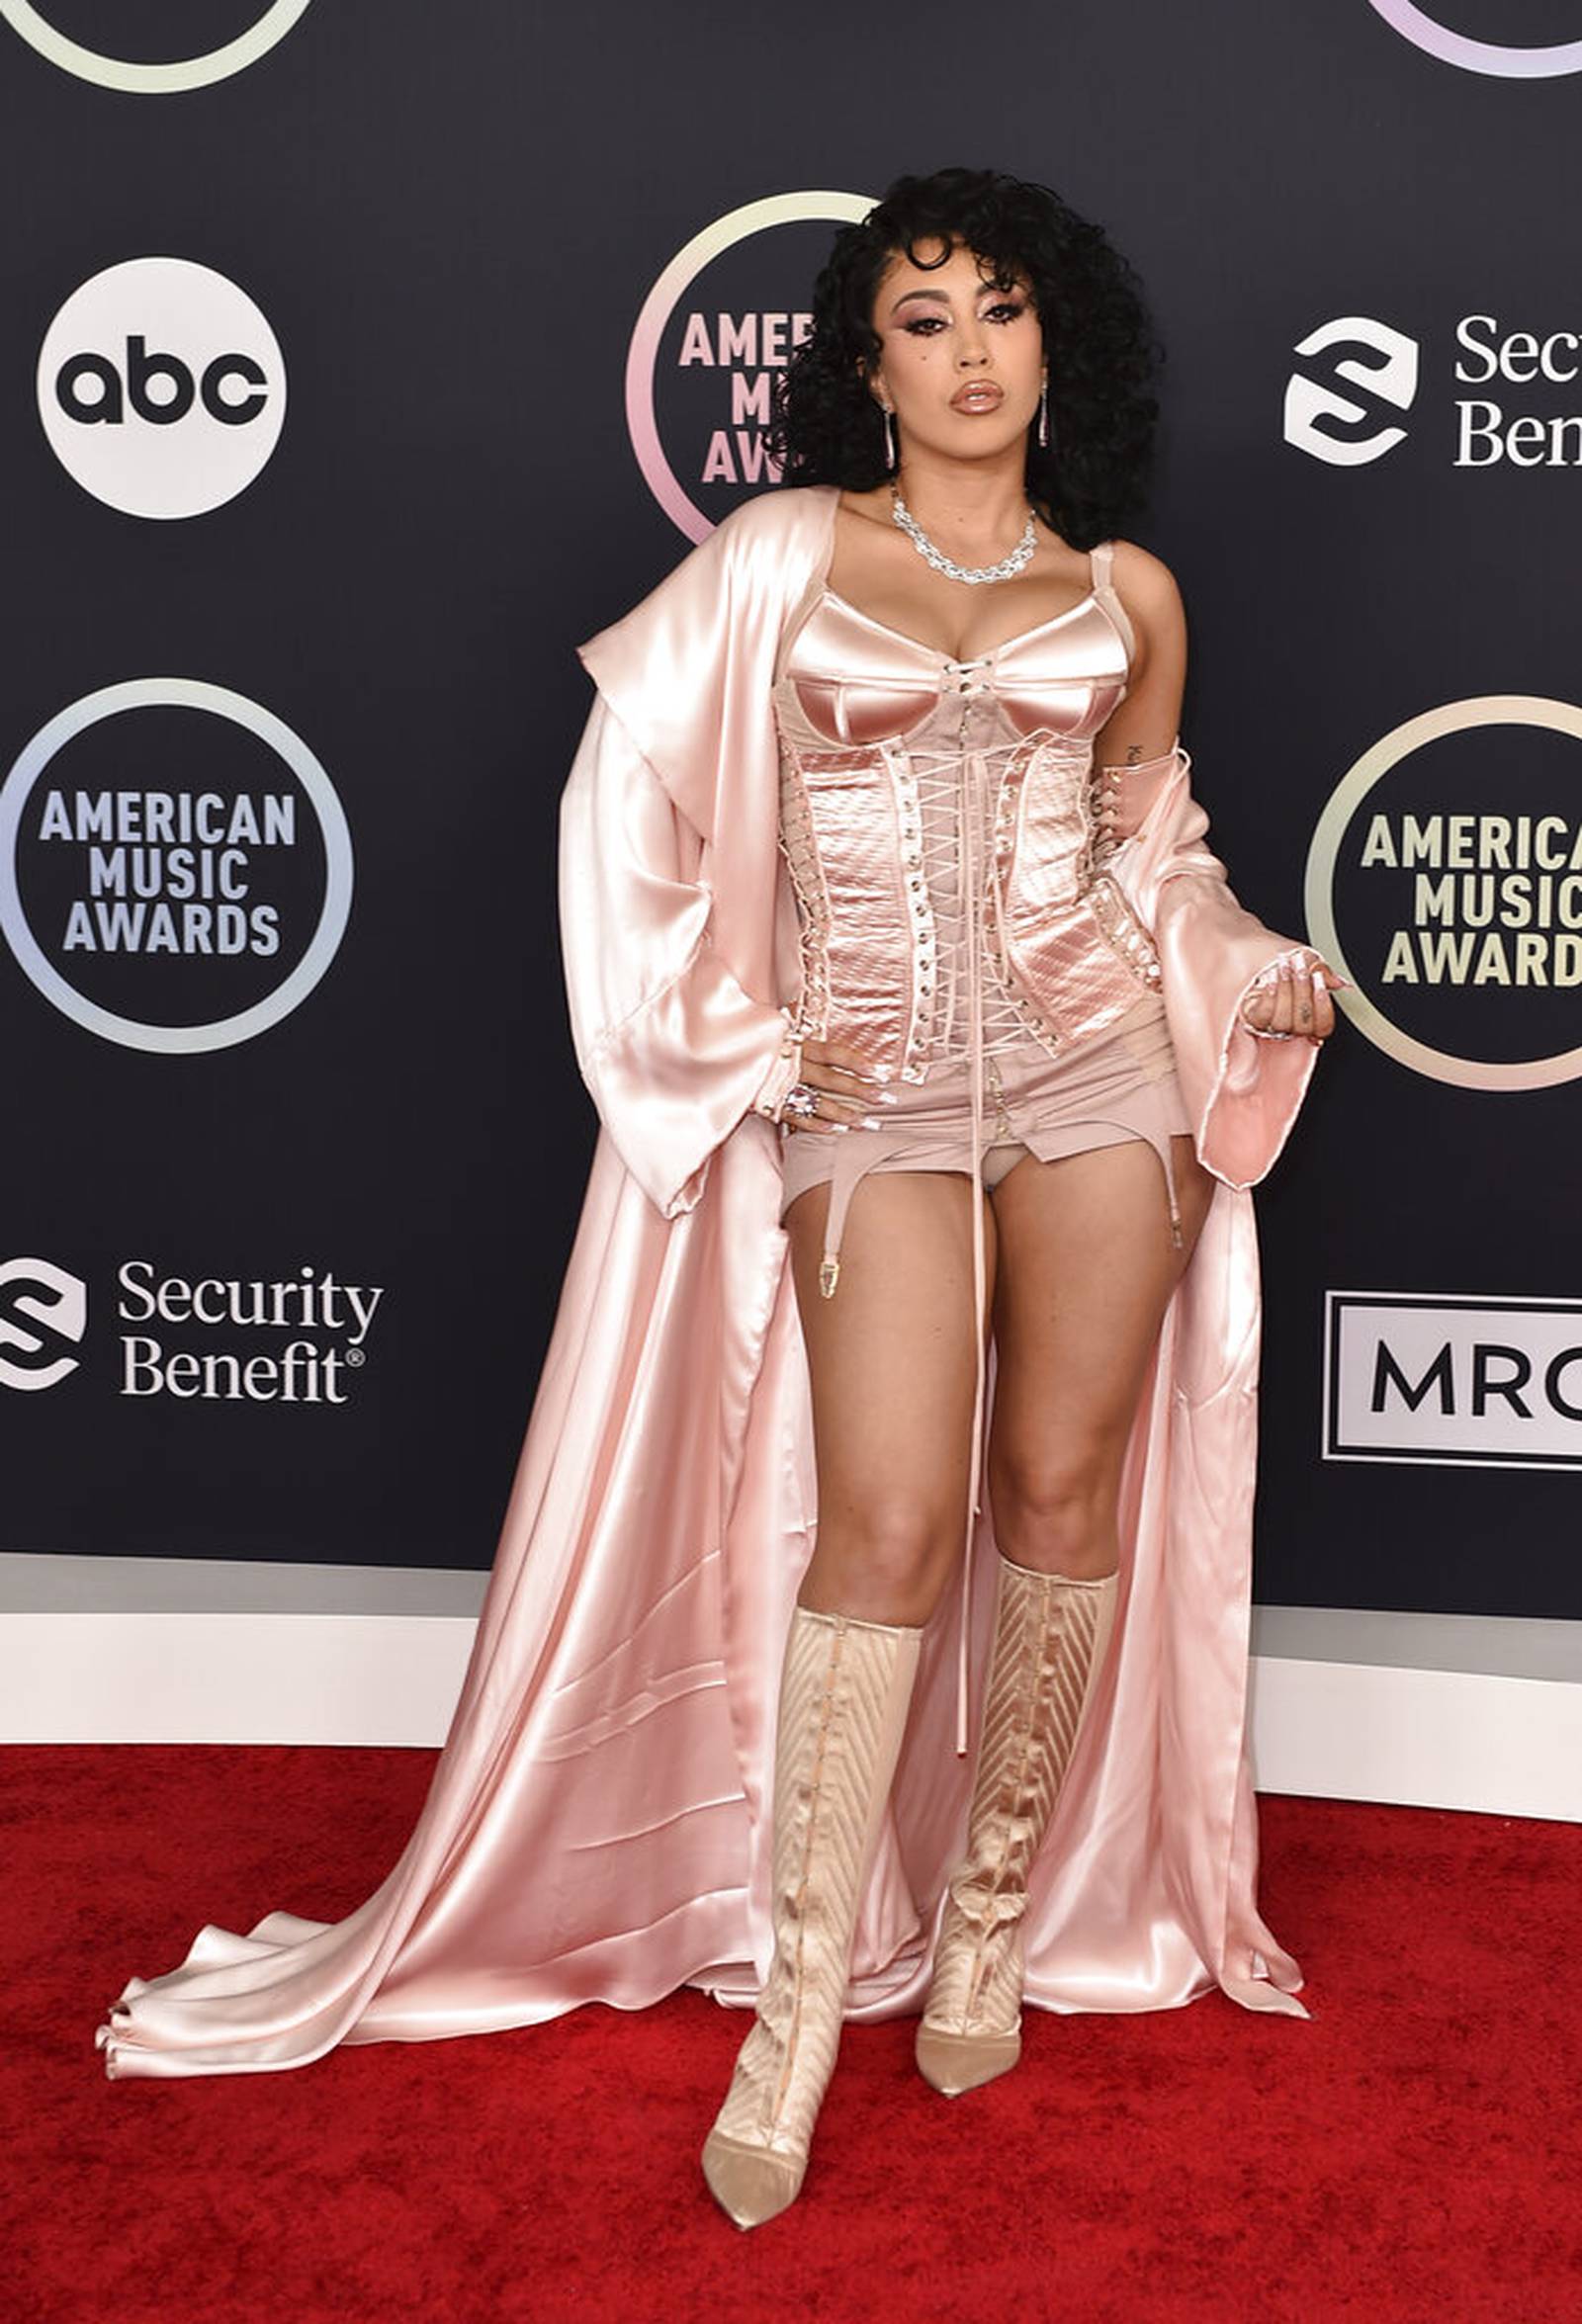 2021 American Music Awards See the complete winners list WSBTV